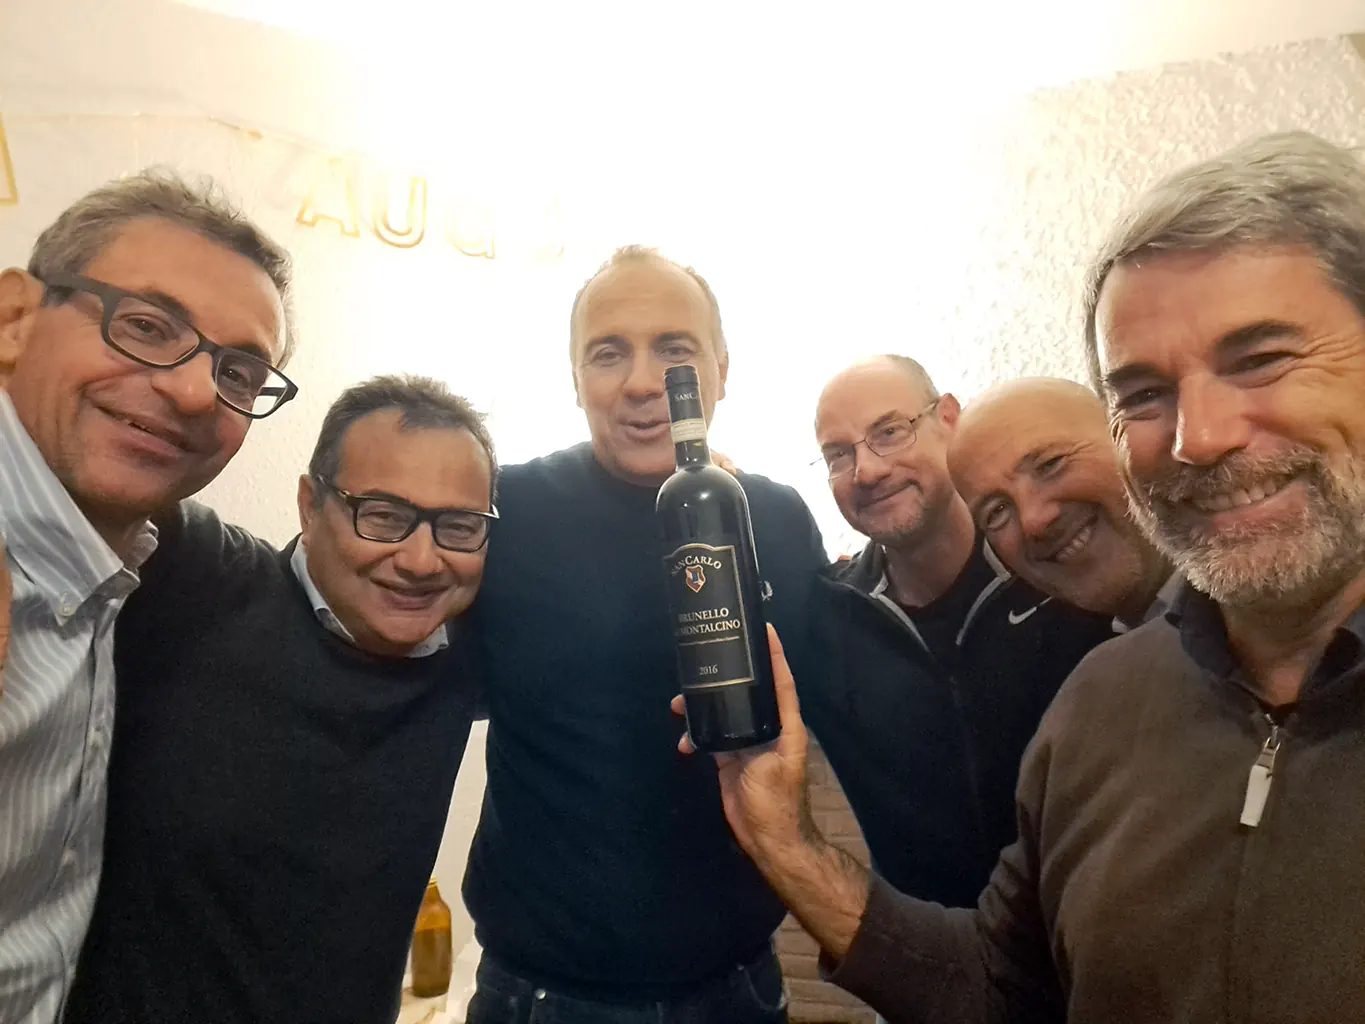 Vittorio and his friends from Rome, November 2022 "Celebrating with old friends ... What have we celebrated? Our almost forty-year friendship and ... always with the fireplace, a good dinner and ... a great Brunello di Gemma Marcucci. Ad maiora! "